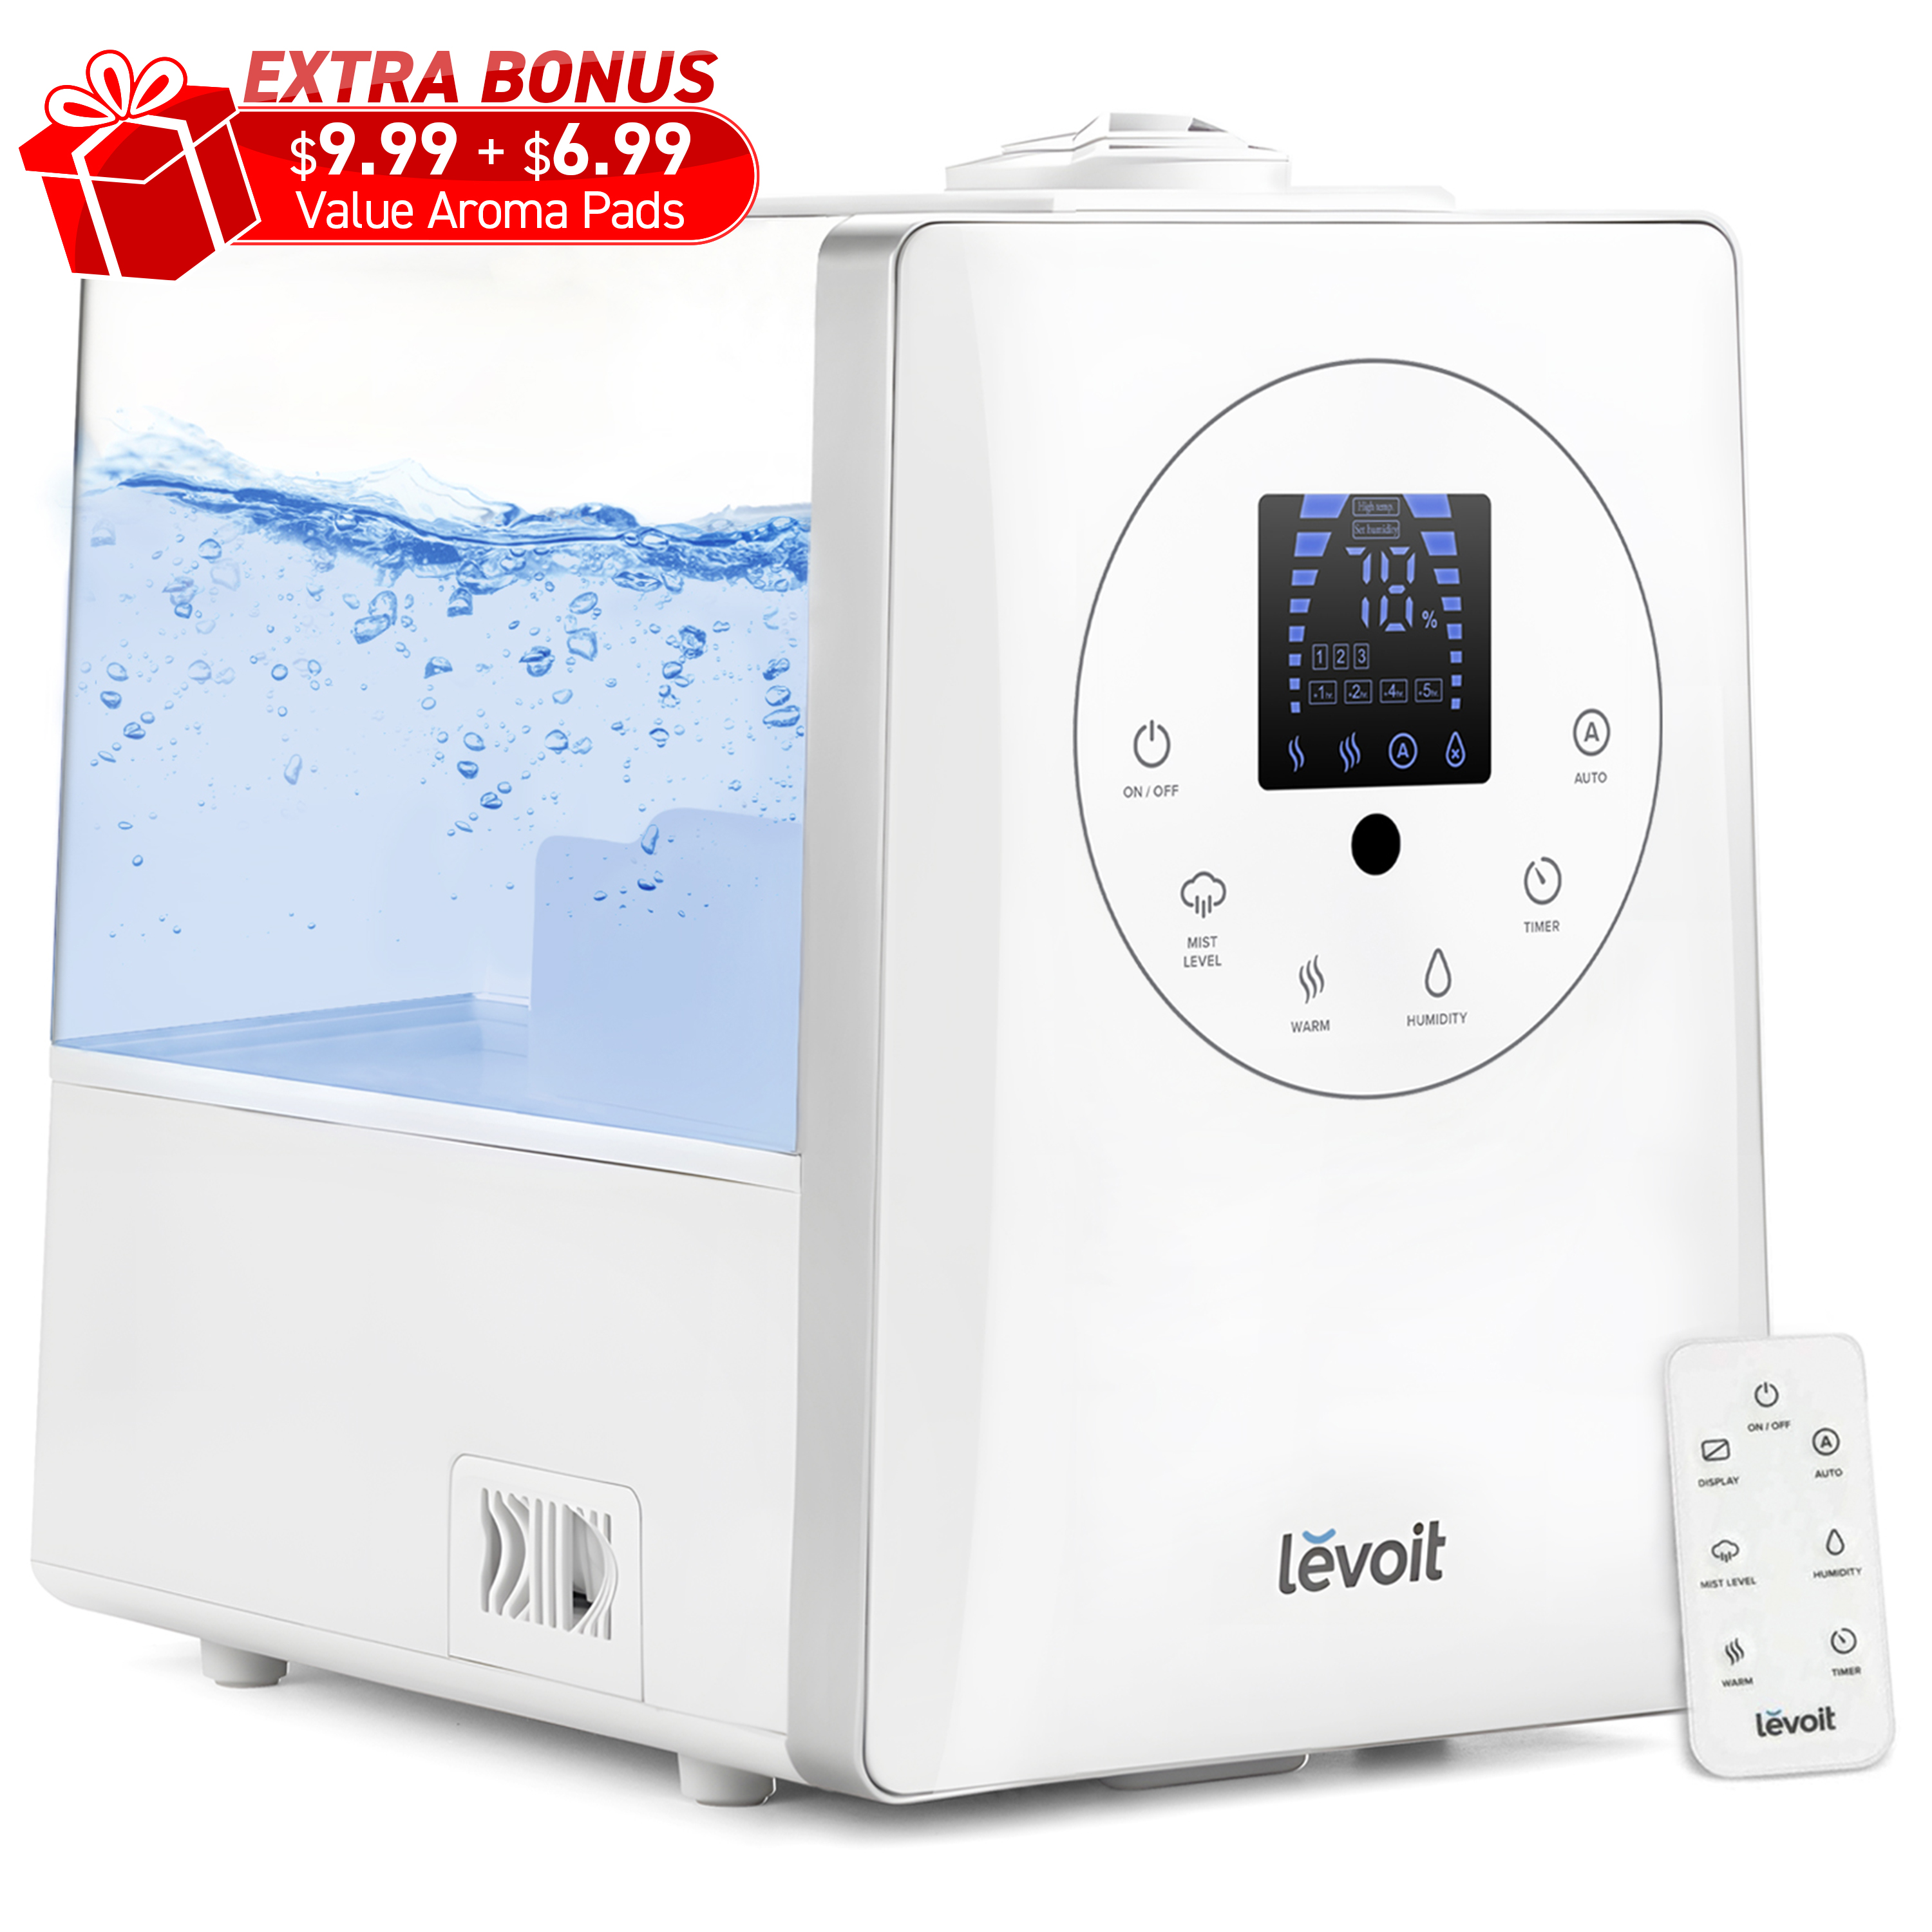 Levoit 6L 753 sq ft Warm and Cool Mist Humidifier, Vaporizer, White - image 1 of 13